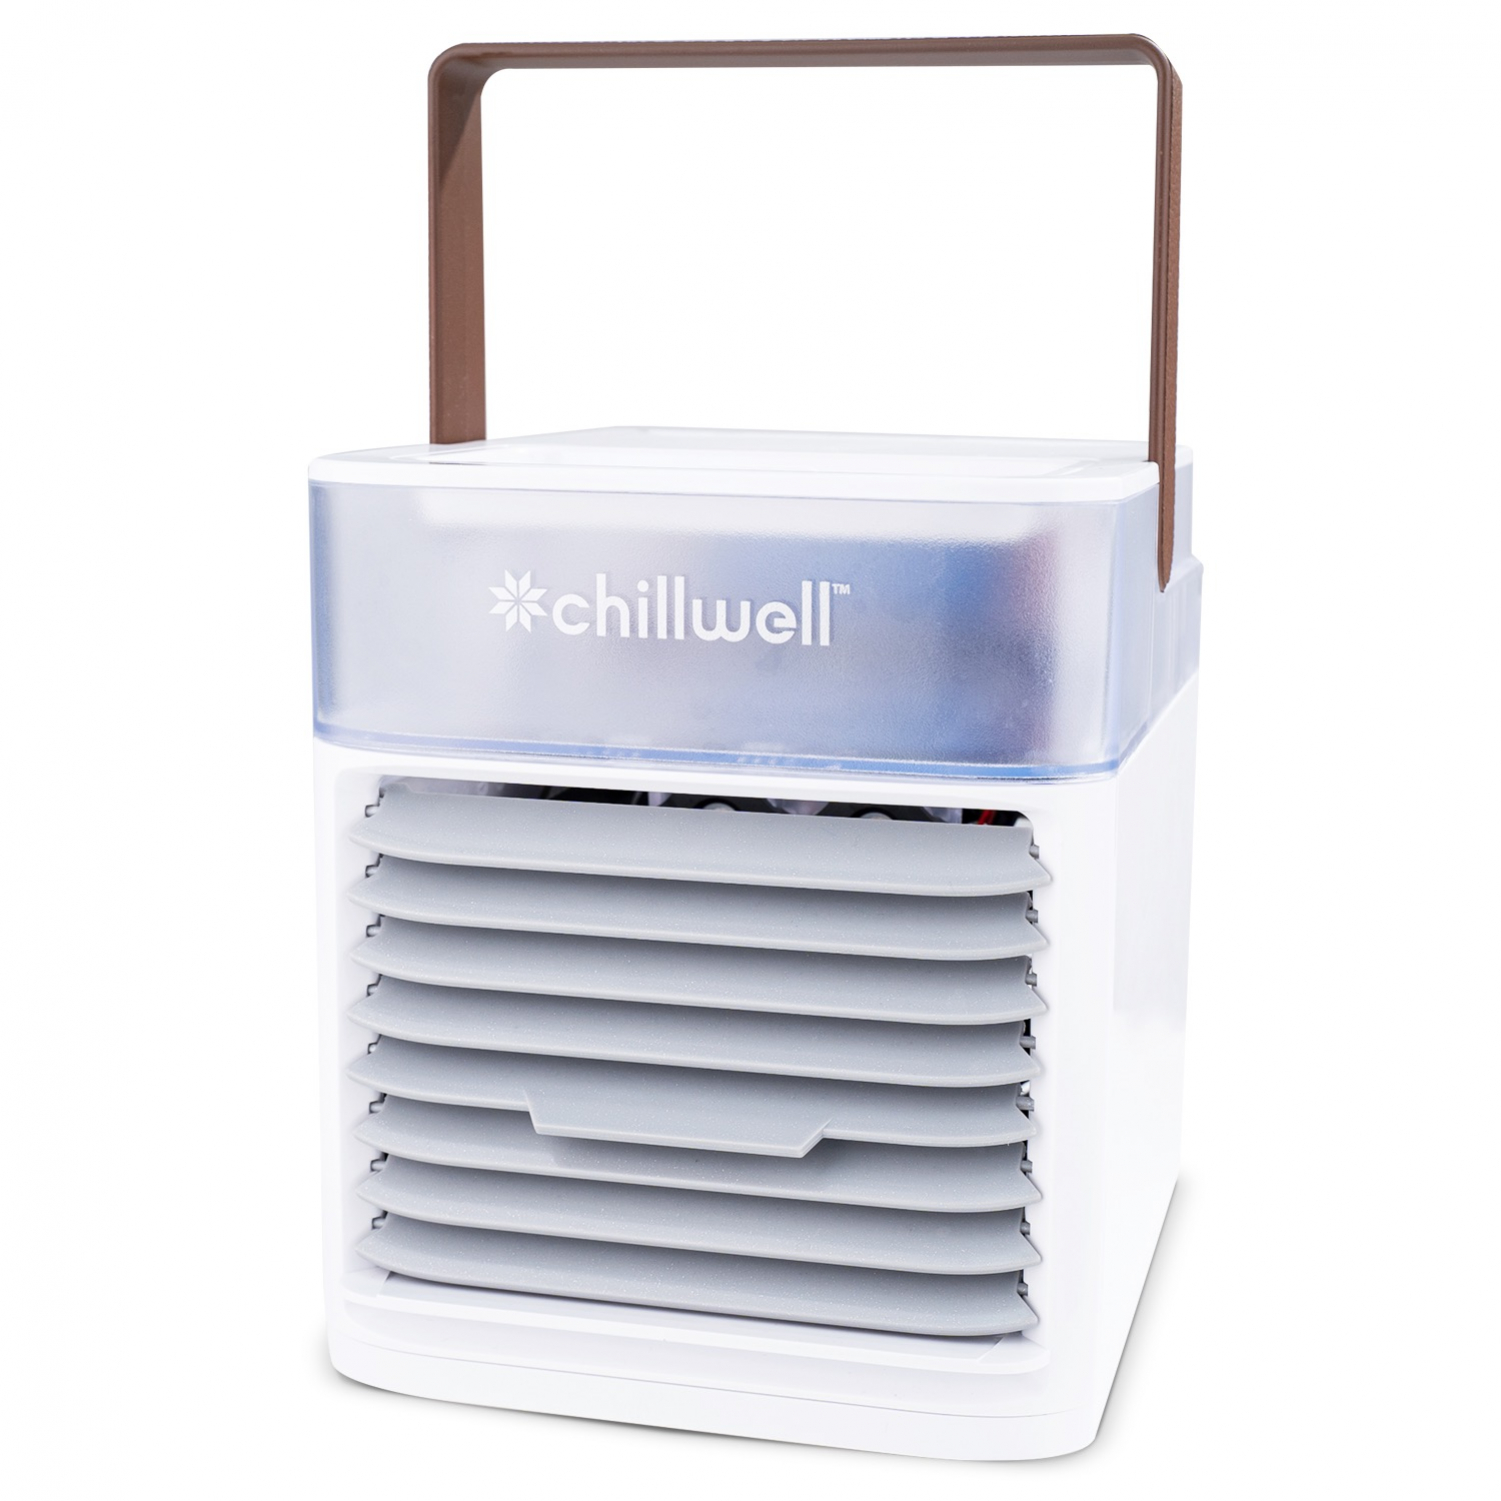 Chillwell AC Unit Reviews